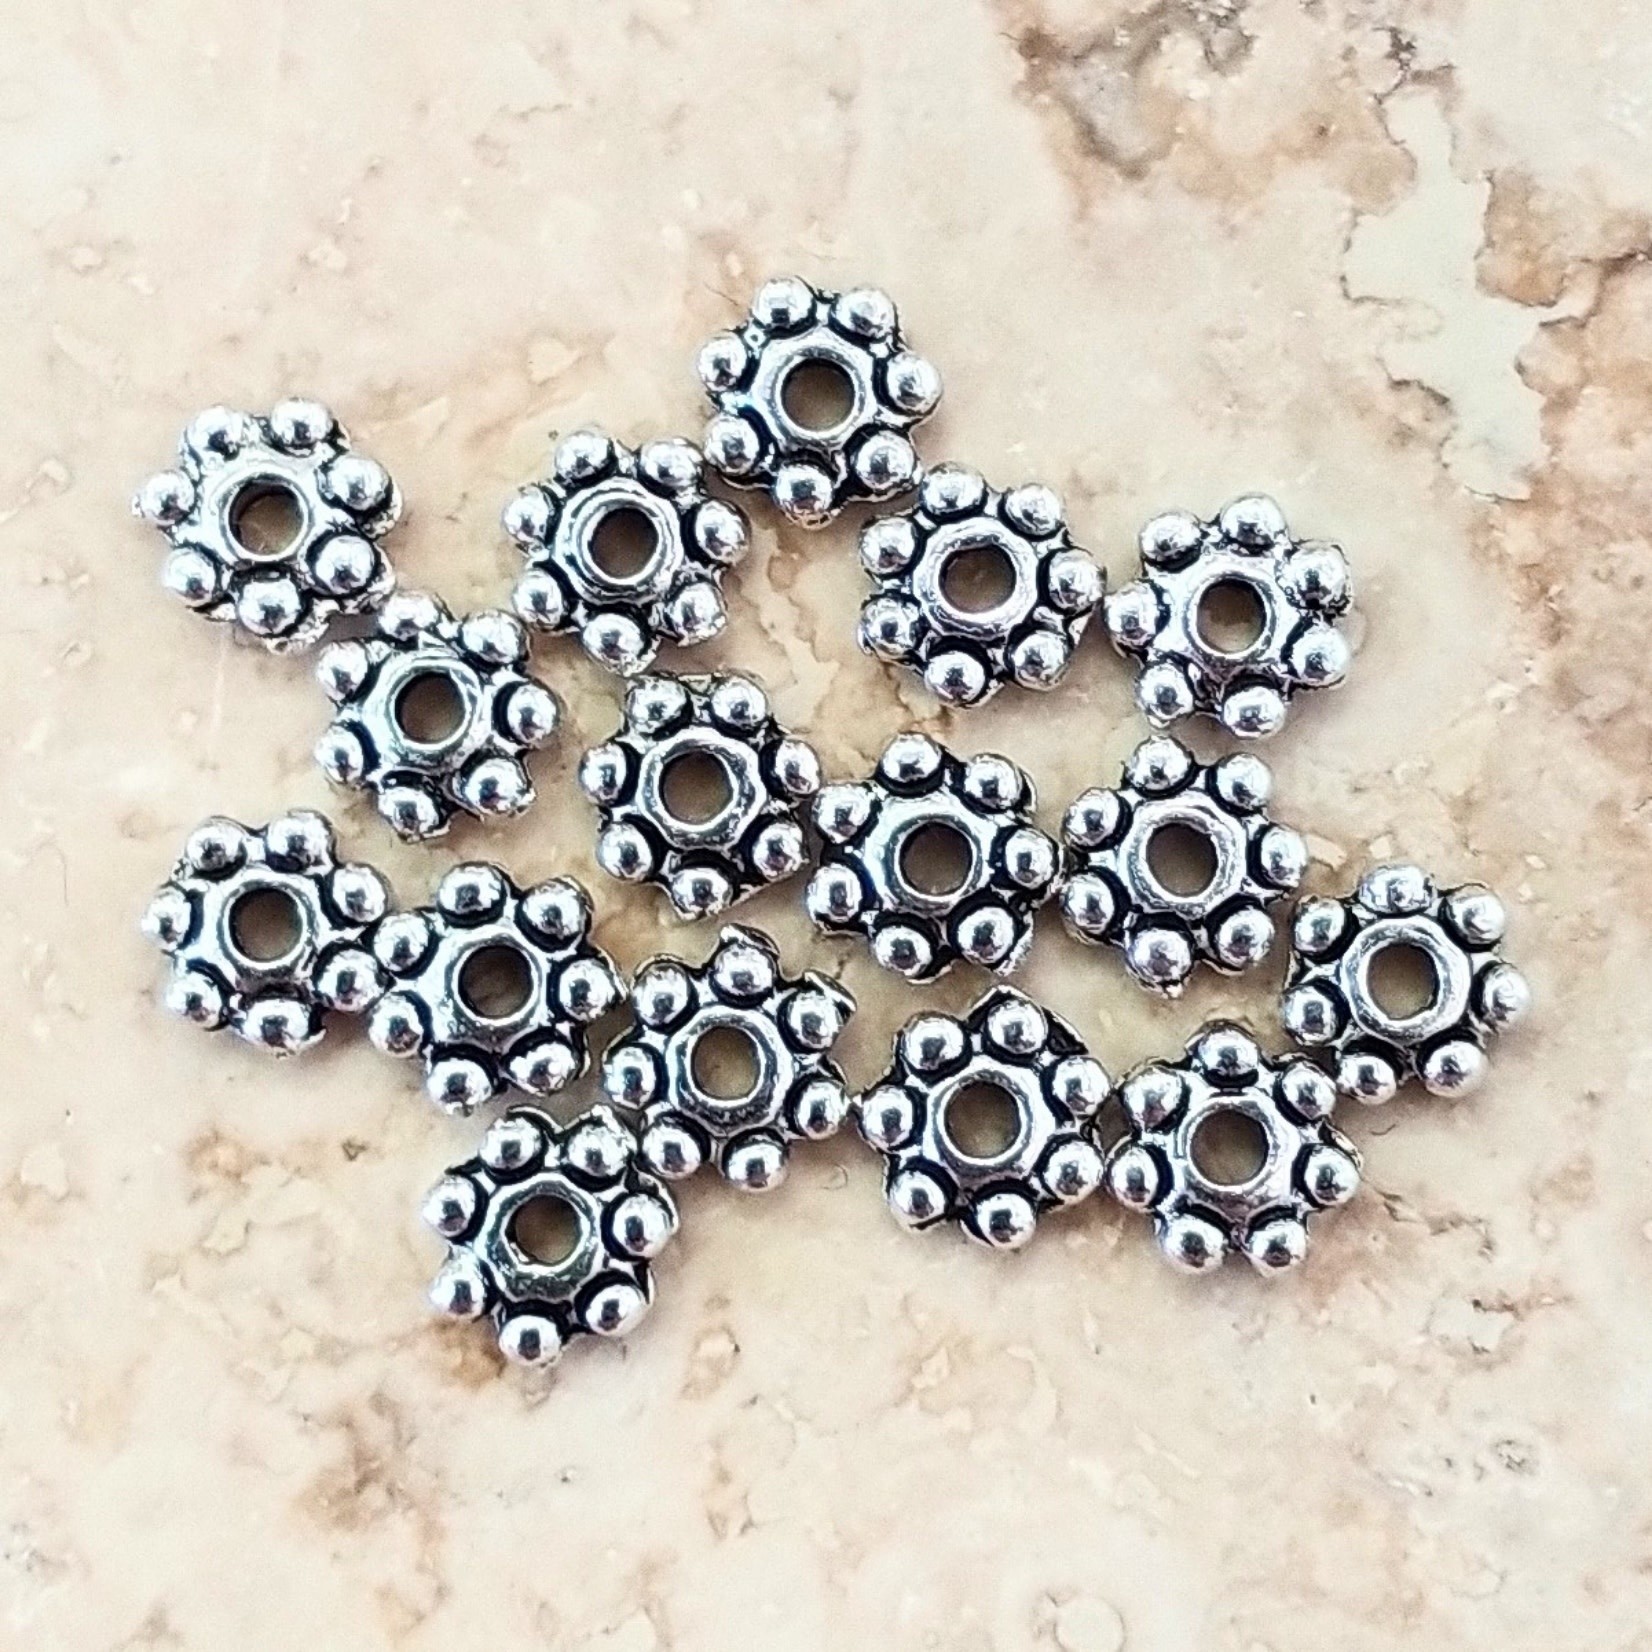 Pewter 4mm Flower Spacers - 100 Pieces